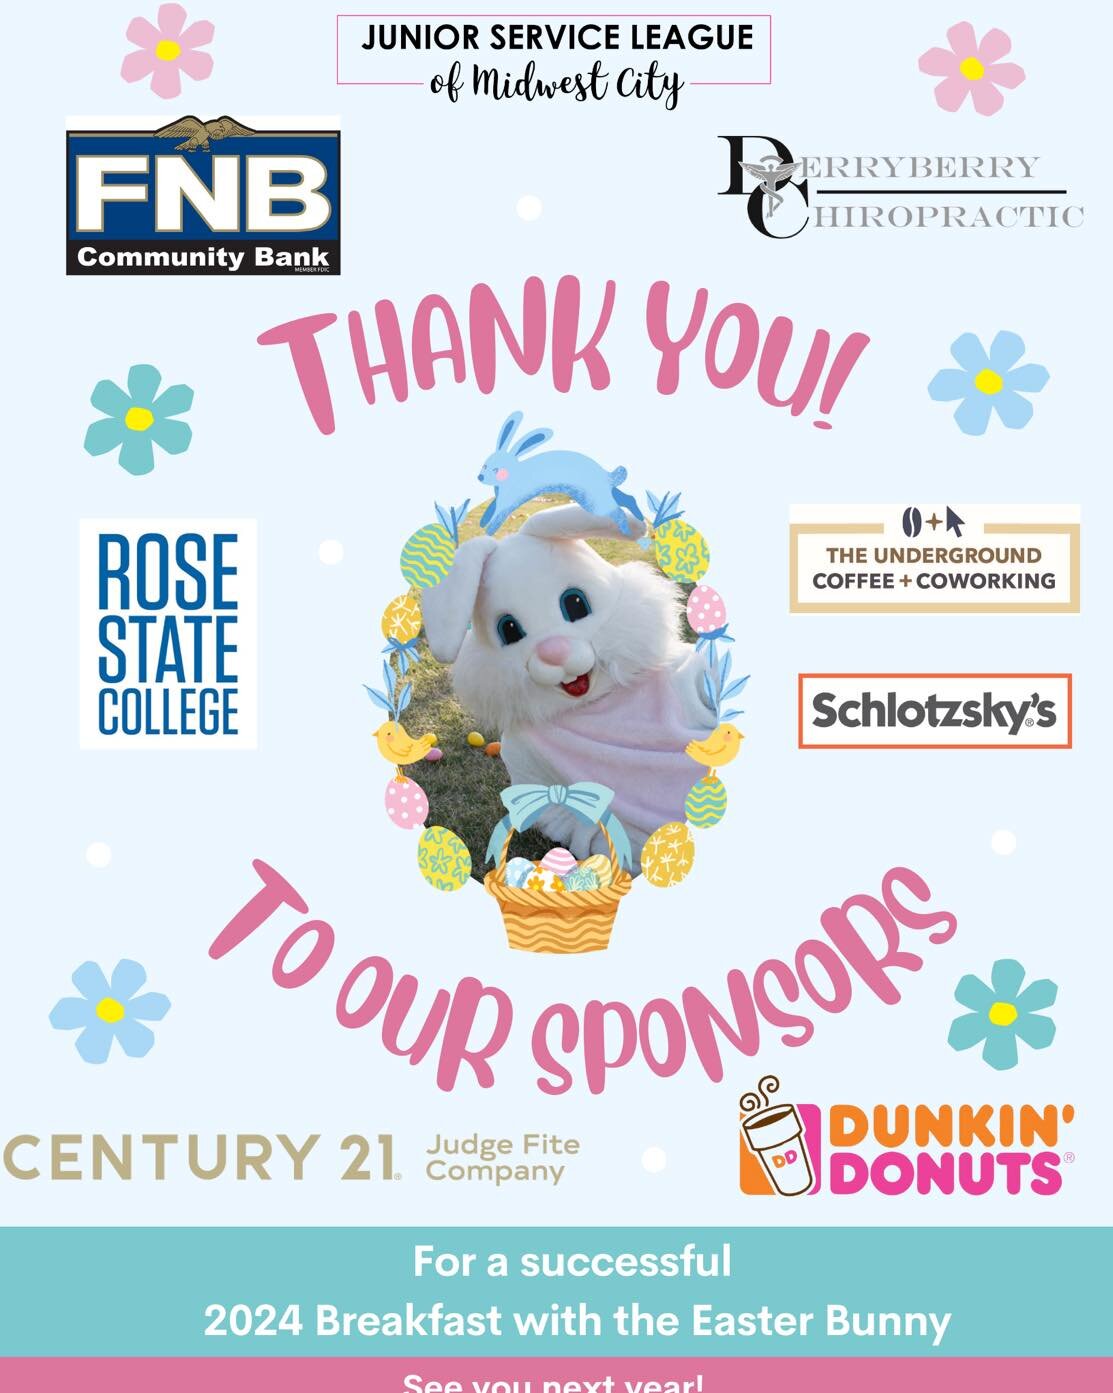 🌸🐰Thank you to all the sponsors supporting JSL&rsquo;s Breakfast with the Easter Bunny! 🐰🌸

FNB Community Bank
The Underground
Rose State College
Schlotzsky's
Dunkin'
Century 21

#jslmwc #jslbweb2024 #cityofmidwestcity #rosestatecollege #easterbu